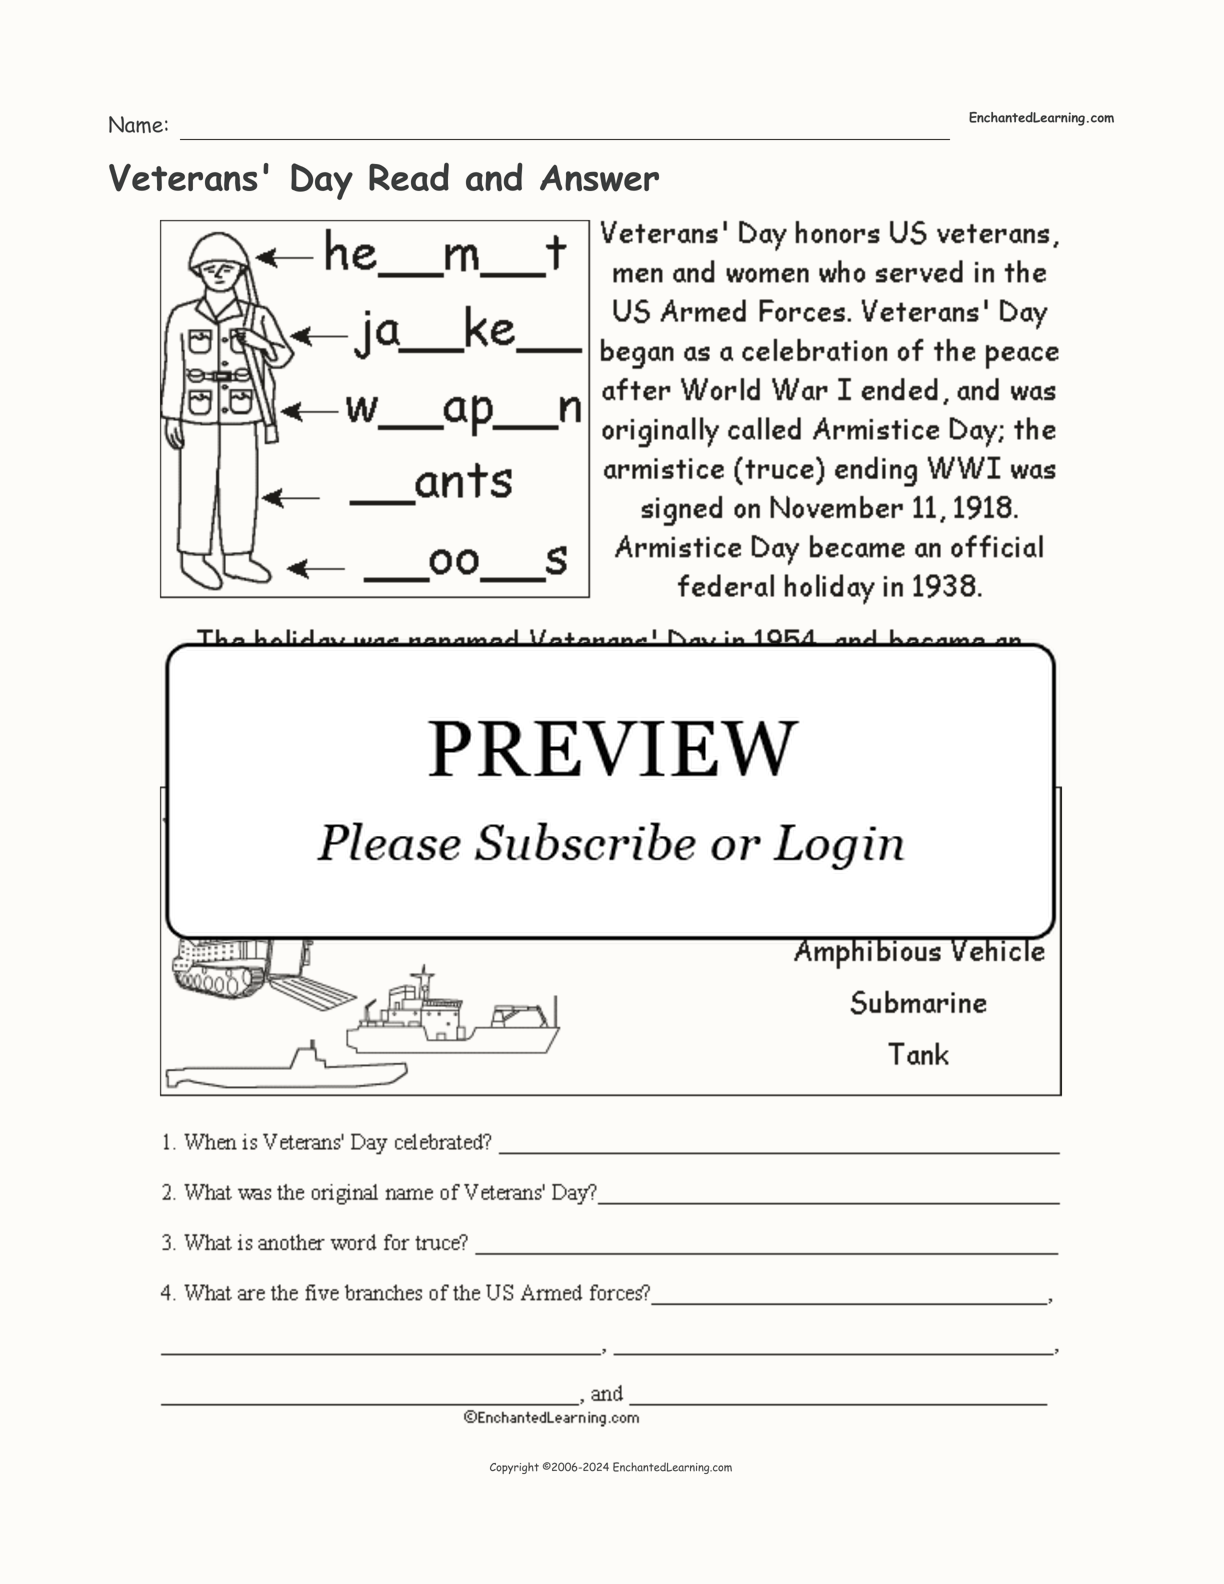 Veterans' Day Read and Answer interactive worksheet page 1